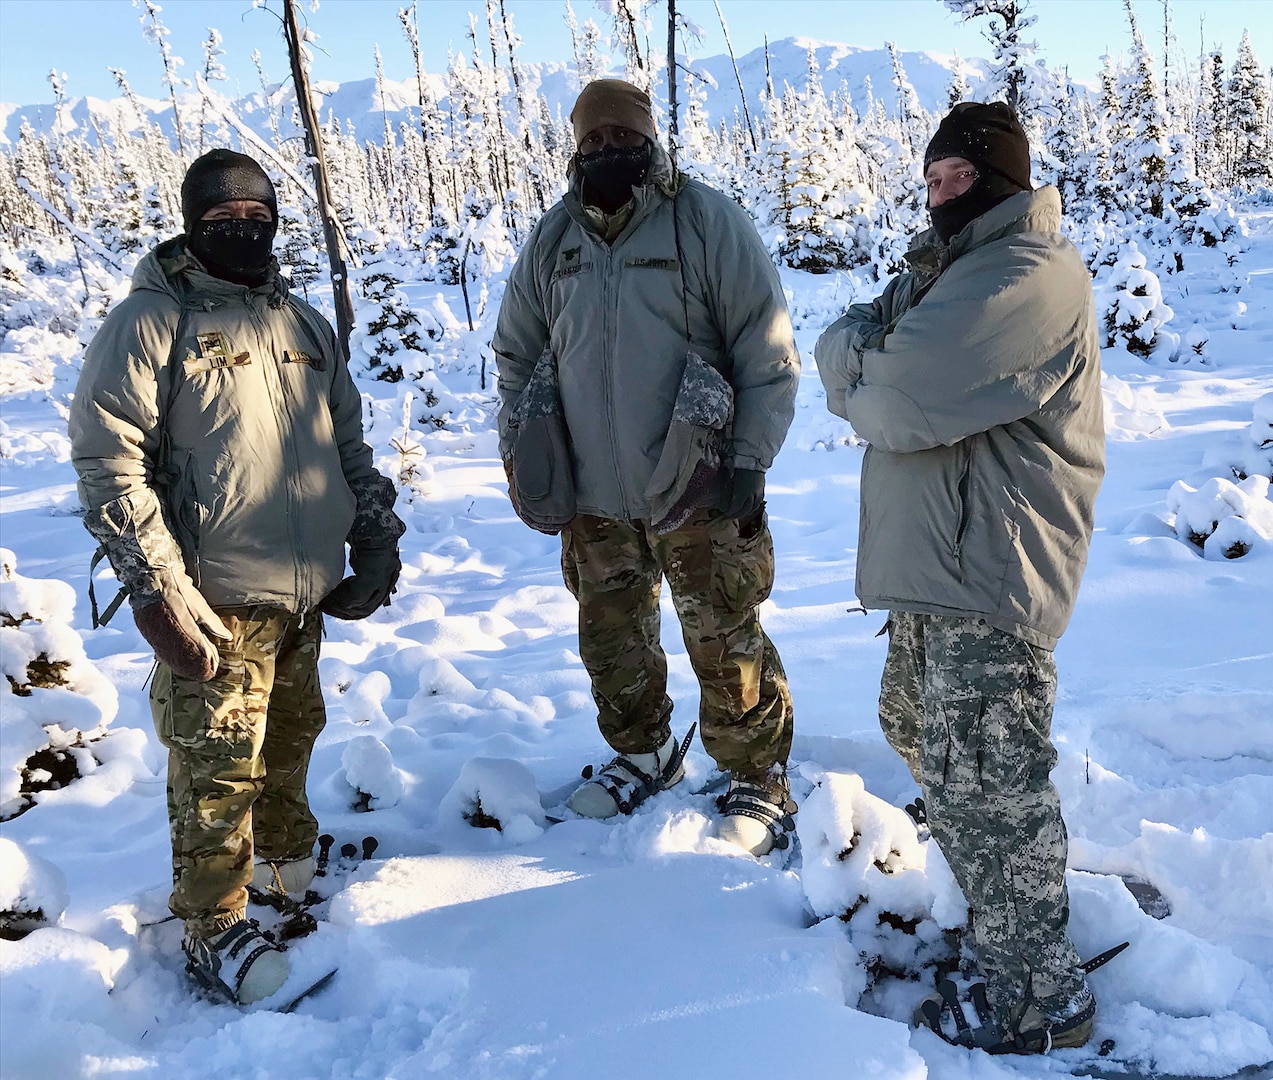 (From left) The Army Capability Manager-Army Health System, or ACM-AHS, team of Col. Joselito Lim, Lt. Col. Cleve Sylvester, and Master Sgt. David Edwards, provided their expertise during Arctic Warrior 21 at Fort Greely, Alaska, from Feb. 6-12 to assess AHS, resolve Arctic Warfare gaps, enhance readiness and inform modernization.